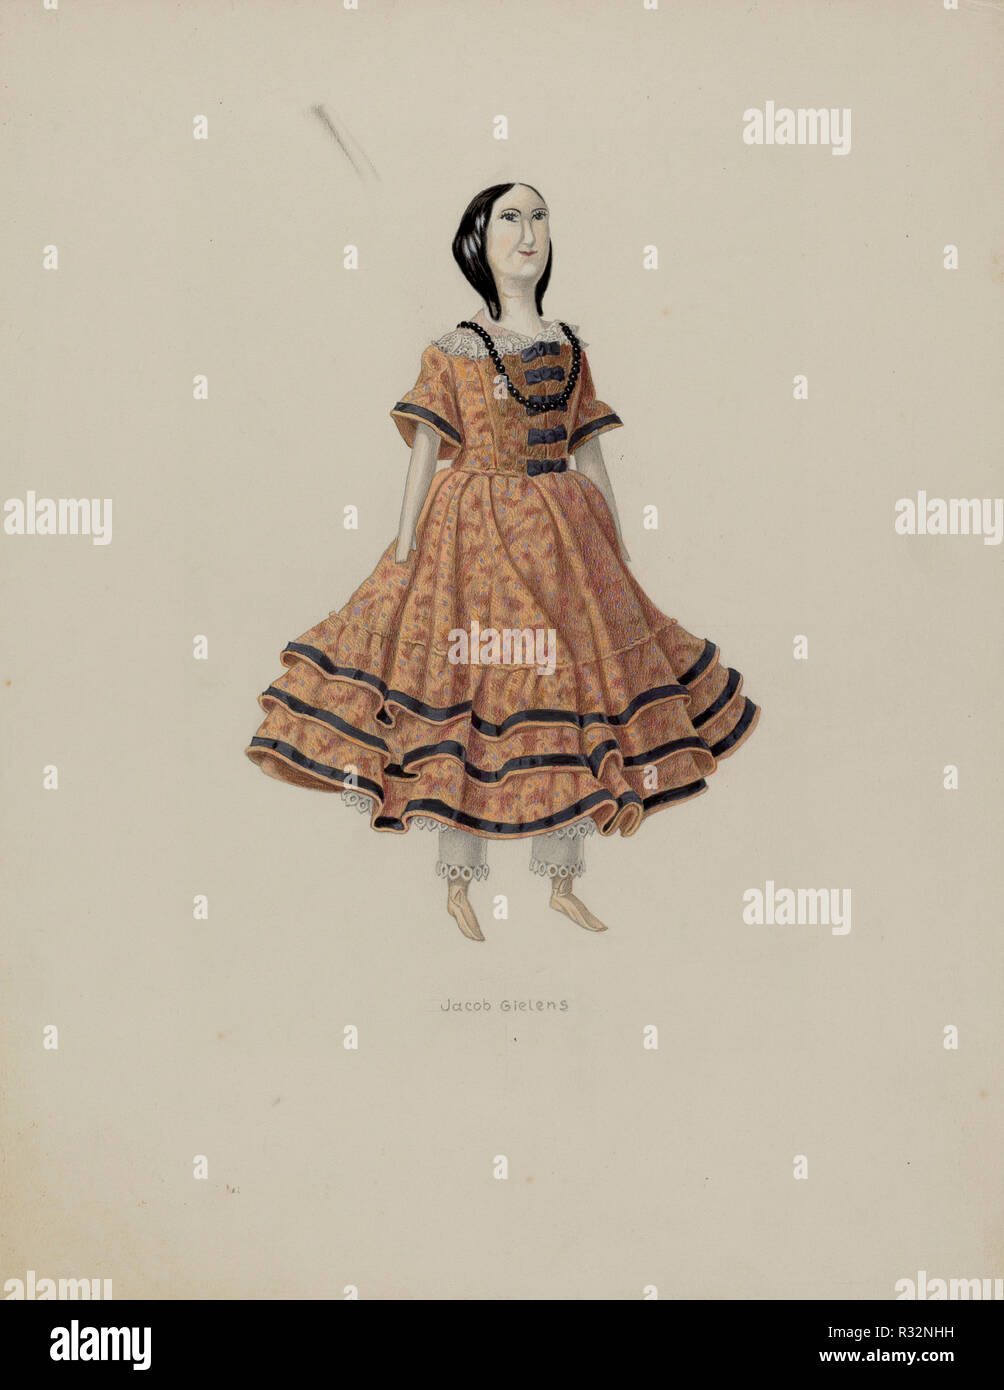 Doll. Dated: c. 1937. Dimensions: overall: 35.7 x 28 cm (14 1/16 x 11 in.)  Original IAD Object: 12' high. Medium: watercolor, graphite, and pen and ink on paperboard. Museum: National Gallery of Art, Washington DC. Author: Jacob Gielens. Stock Photo